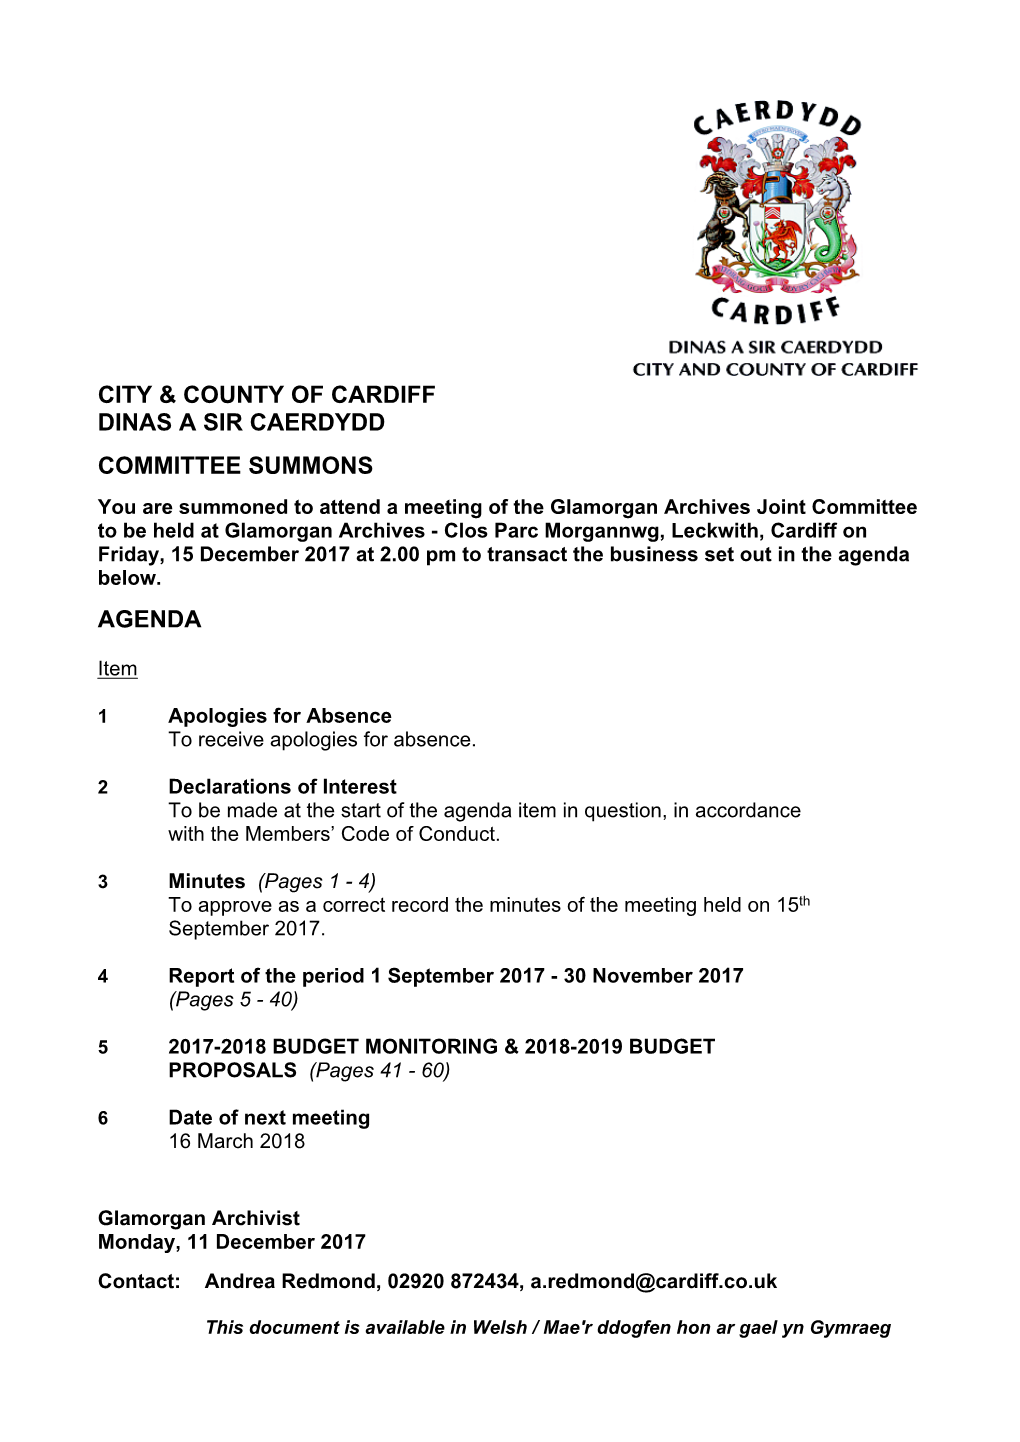 (Public Pack)Agenda Document for Glamorgan Archives Joint Committee, 15/12/2017 14:00